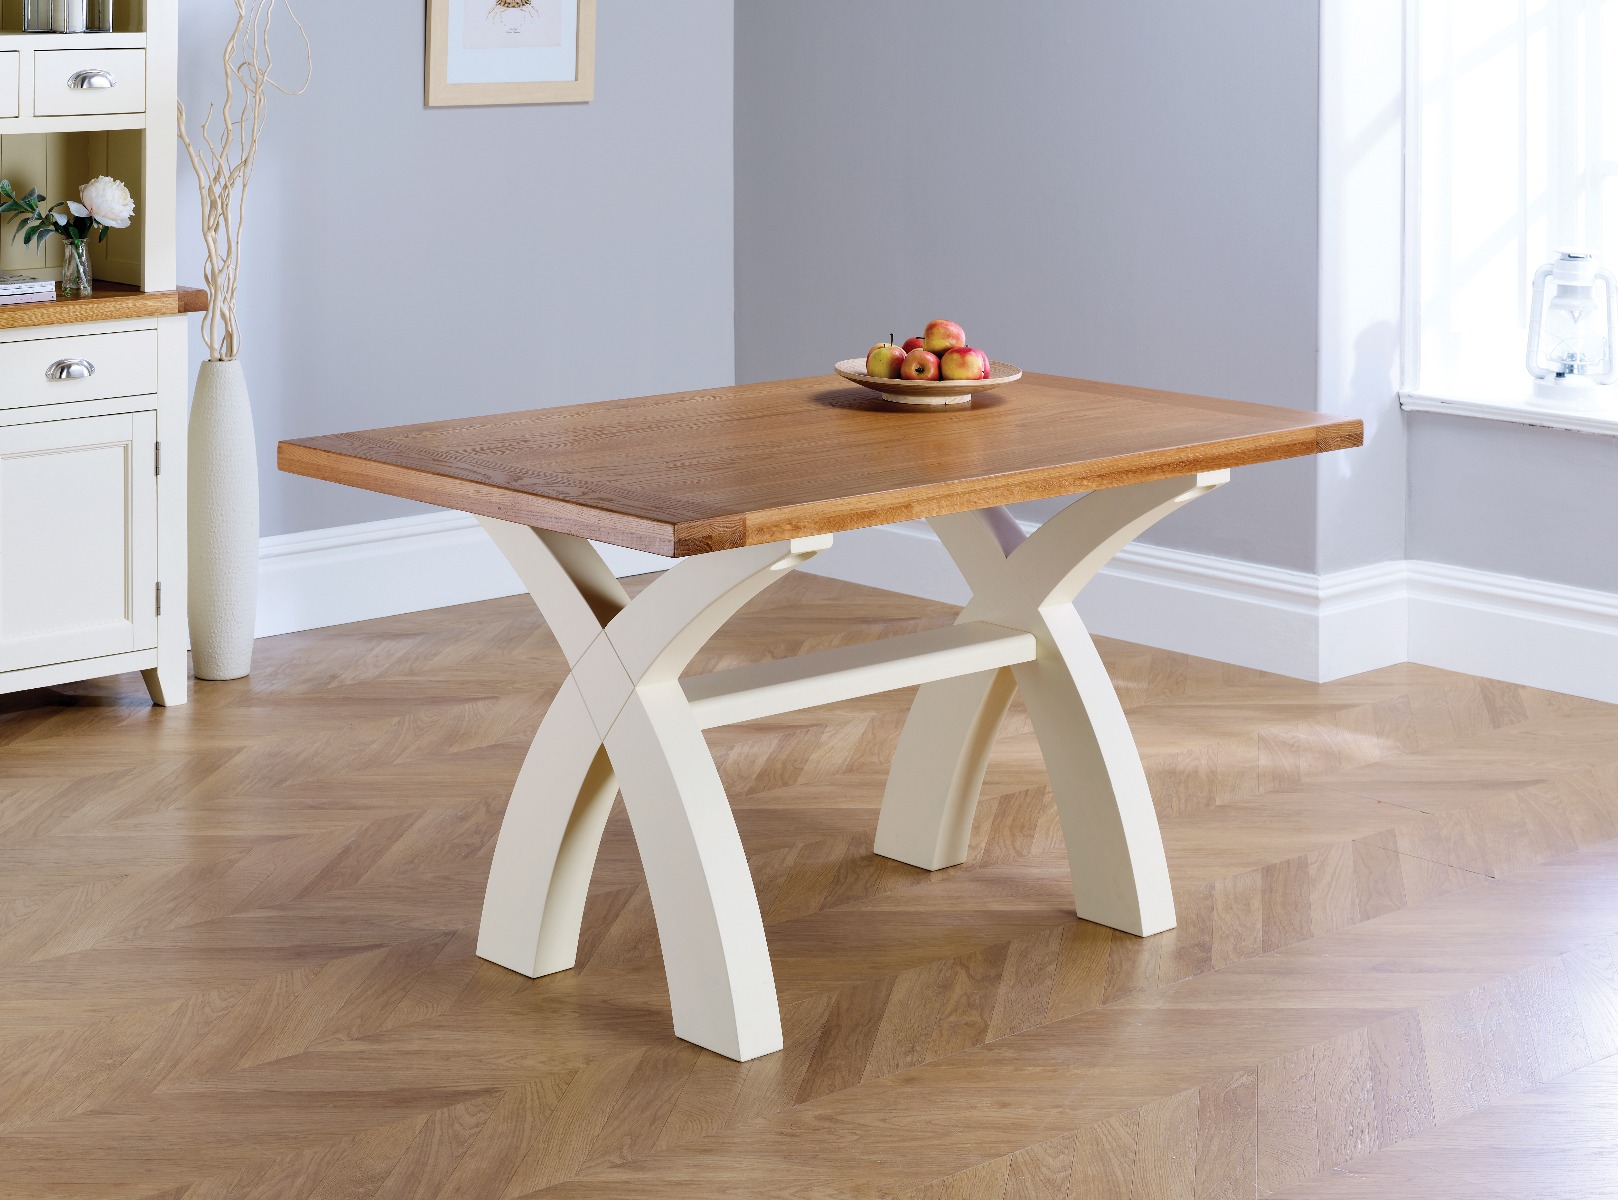 Country Oak 140cm Cream Painted Cross Leg Square Ended Dining Table